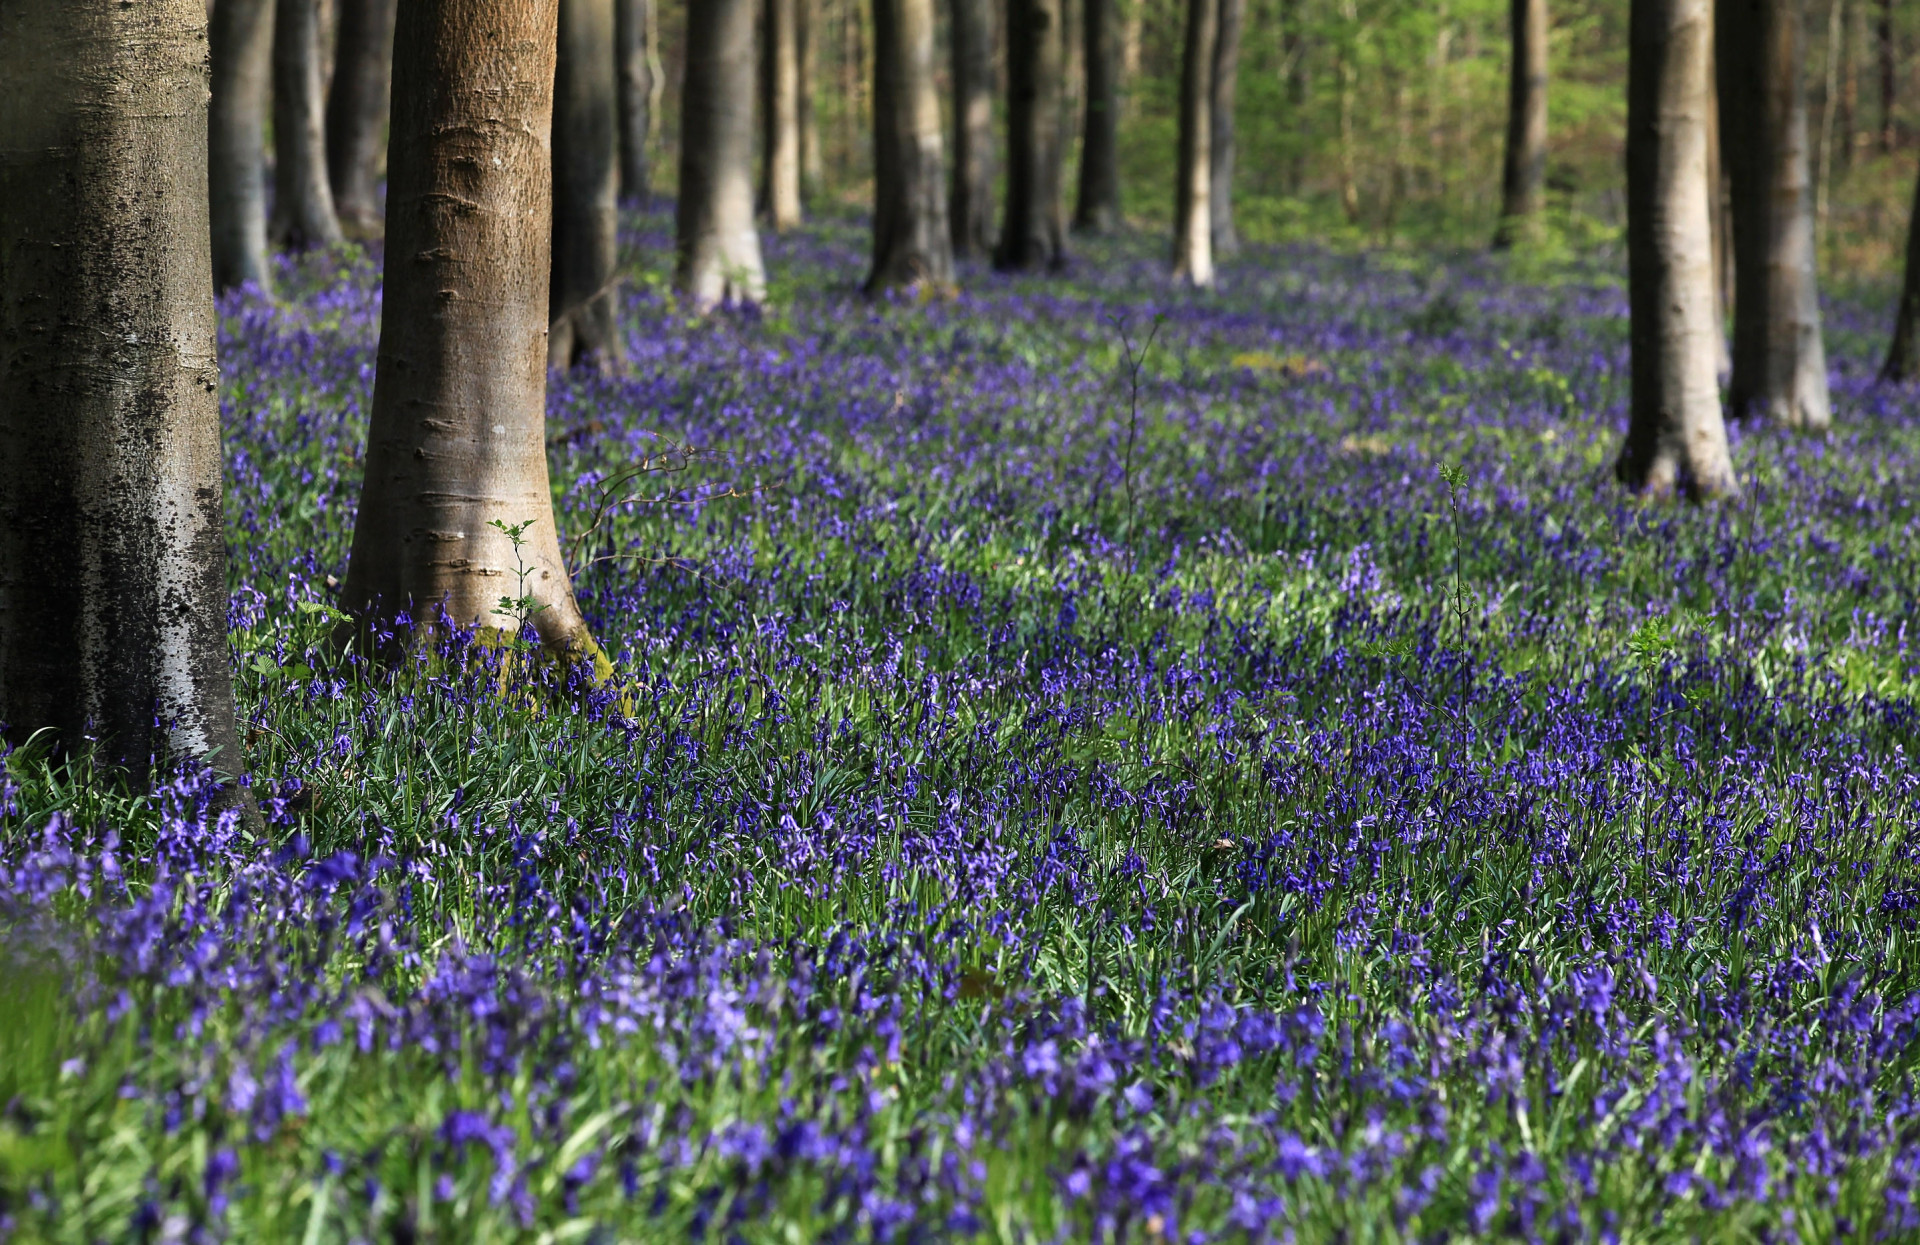 Bluebells begin to bloom in West Woods near Marlborough in Wiltshire.<p>You may also like:<a href="https://www.starsinsider.com/n/452908?utm_source=msn.com&utm_medium=display&utm_campaign=referral_description&utm_content=344596v2en-us"> Ridiculous jobs celebs hired people to do for them</a></p>